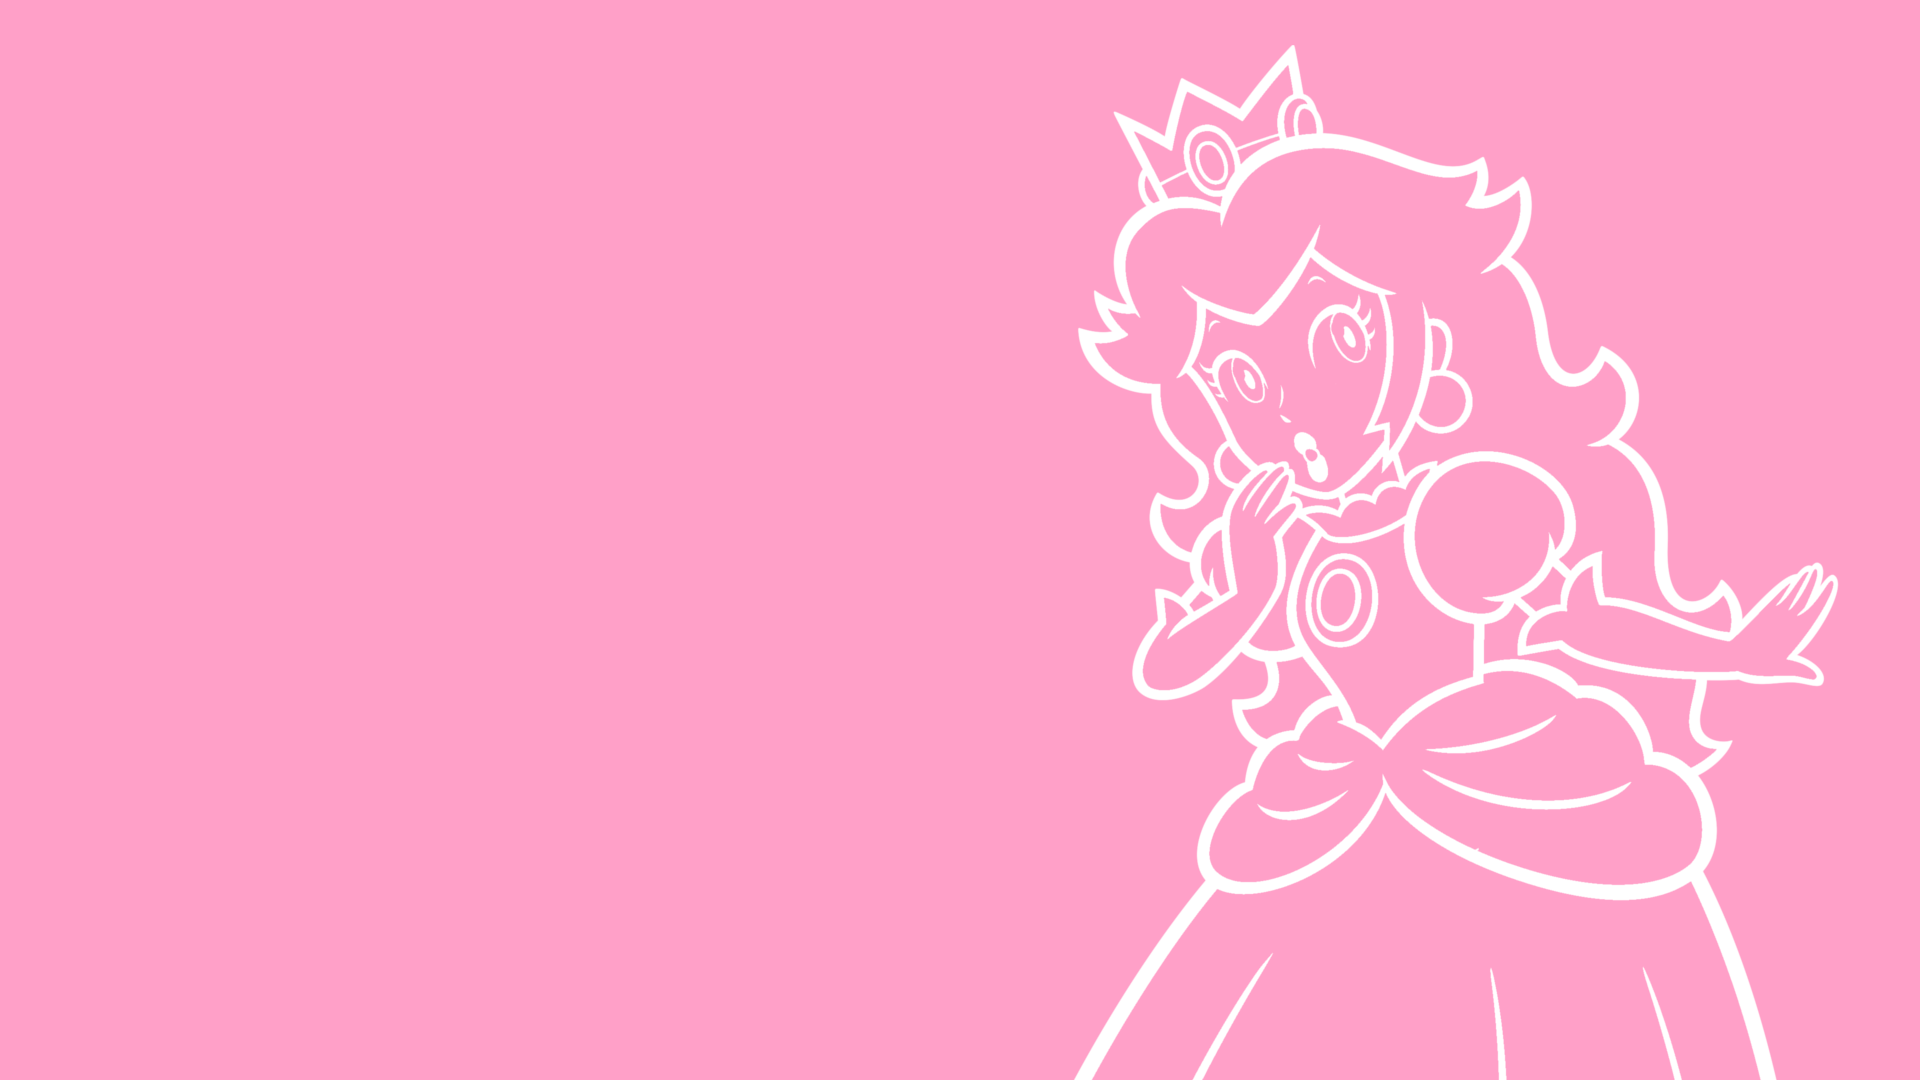 A beautiful illustration of Princess Peach from Super Mario, with a pink background and text on the left side of the image. - Princess Peach